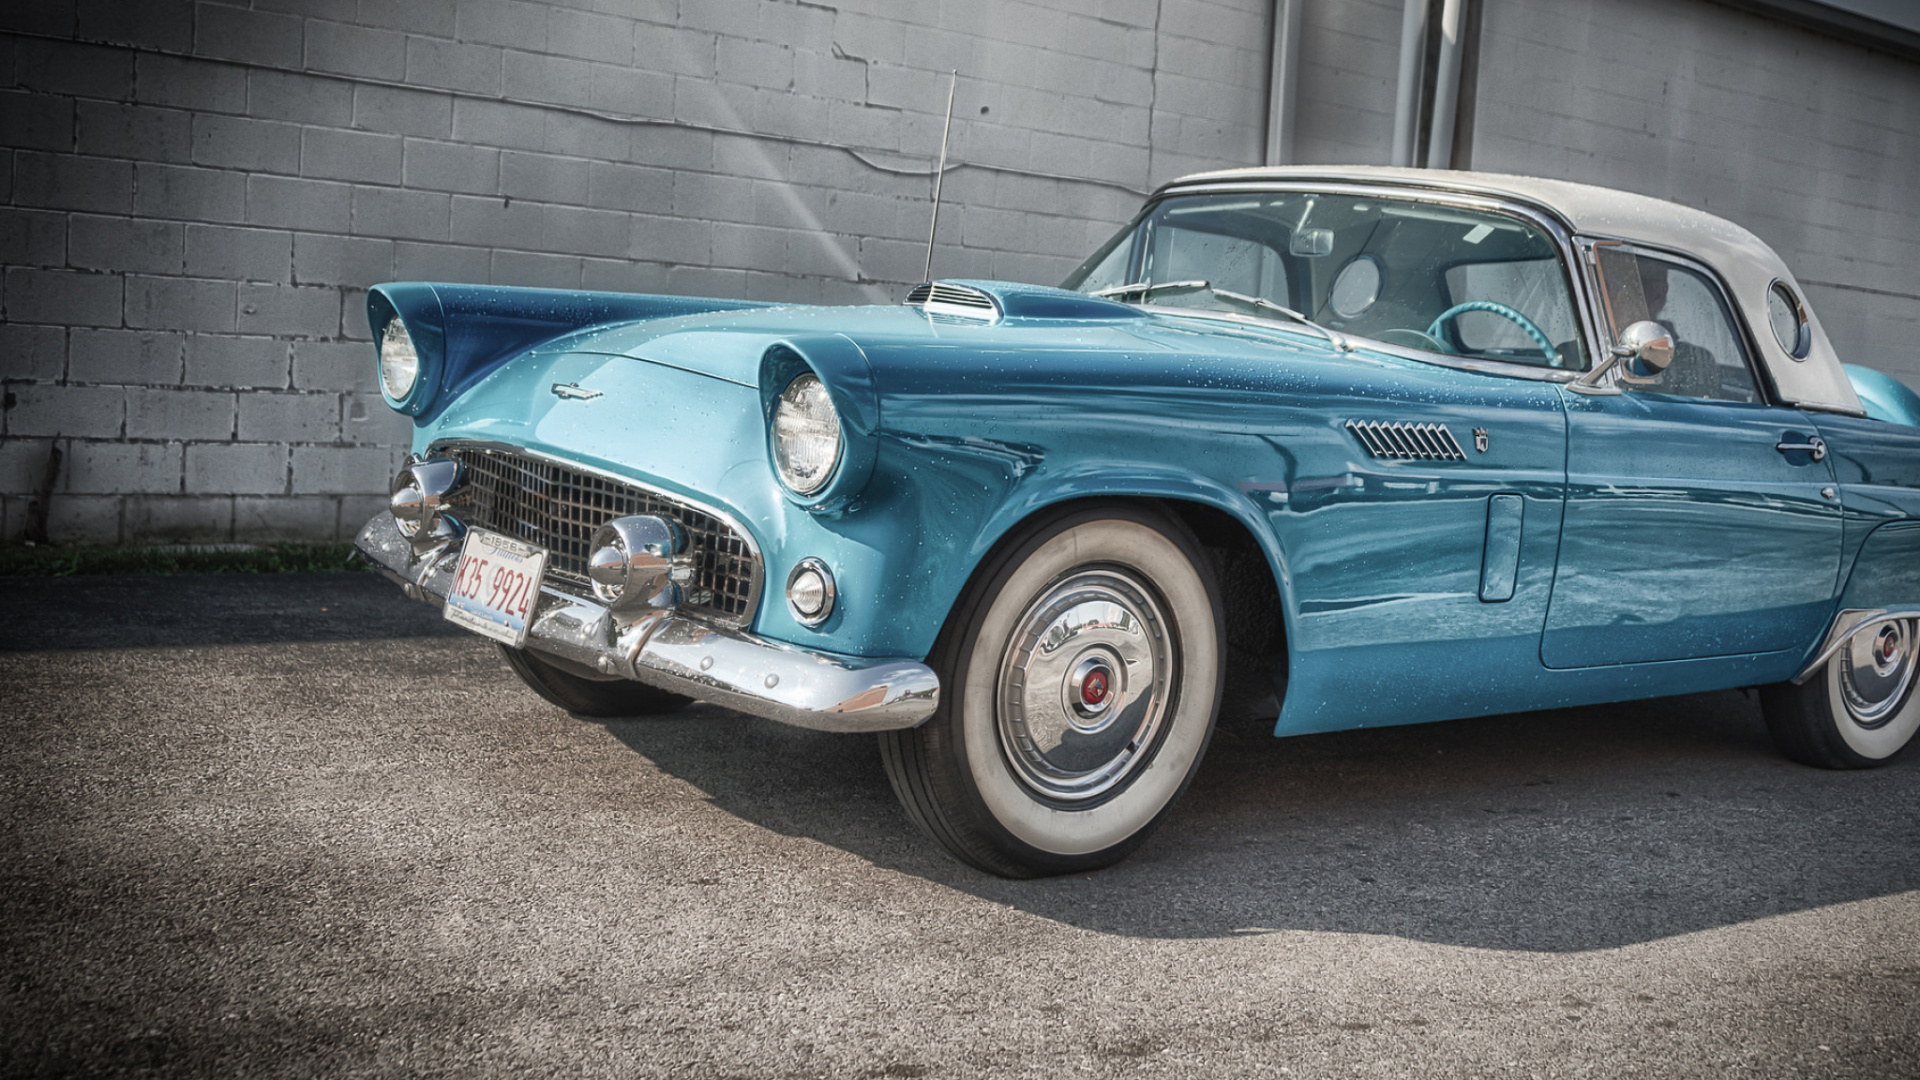 Blue Classic Car Parked on Gray Concrete Pavement During Daytime. Wallpaper in 1920x1080 Resolution